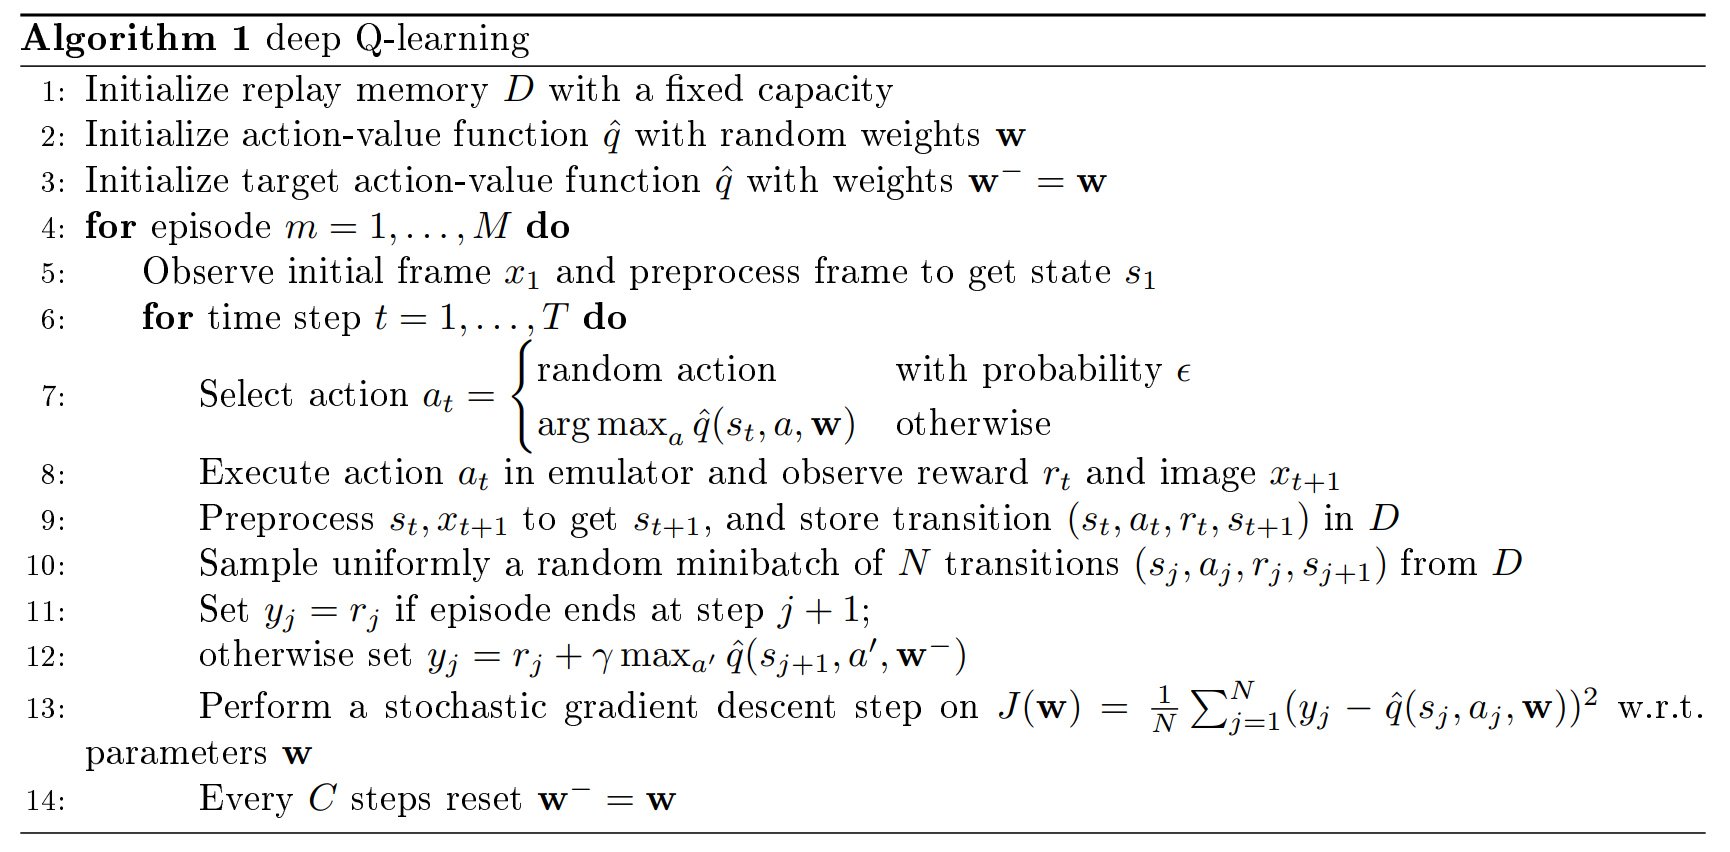 docs/stanford-cs234-notes-zh/img/fig6_alg_1.png